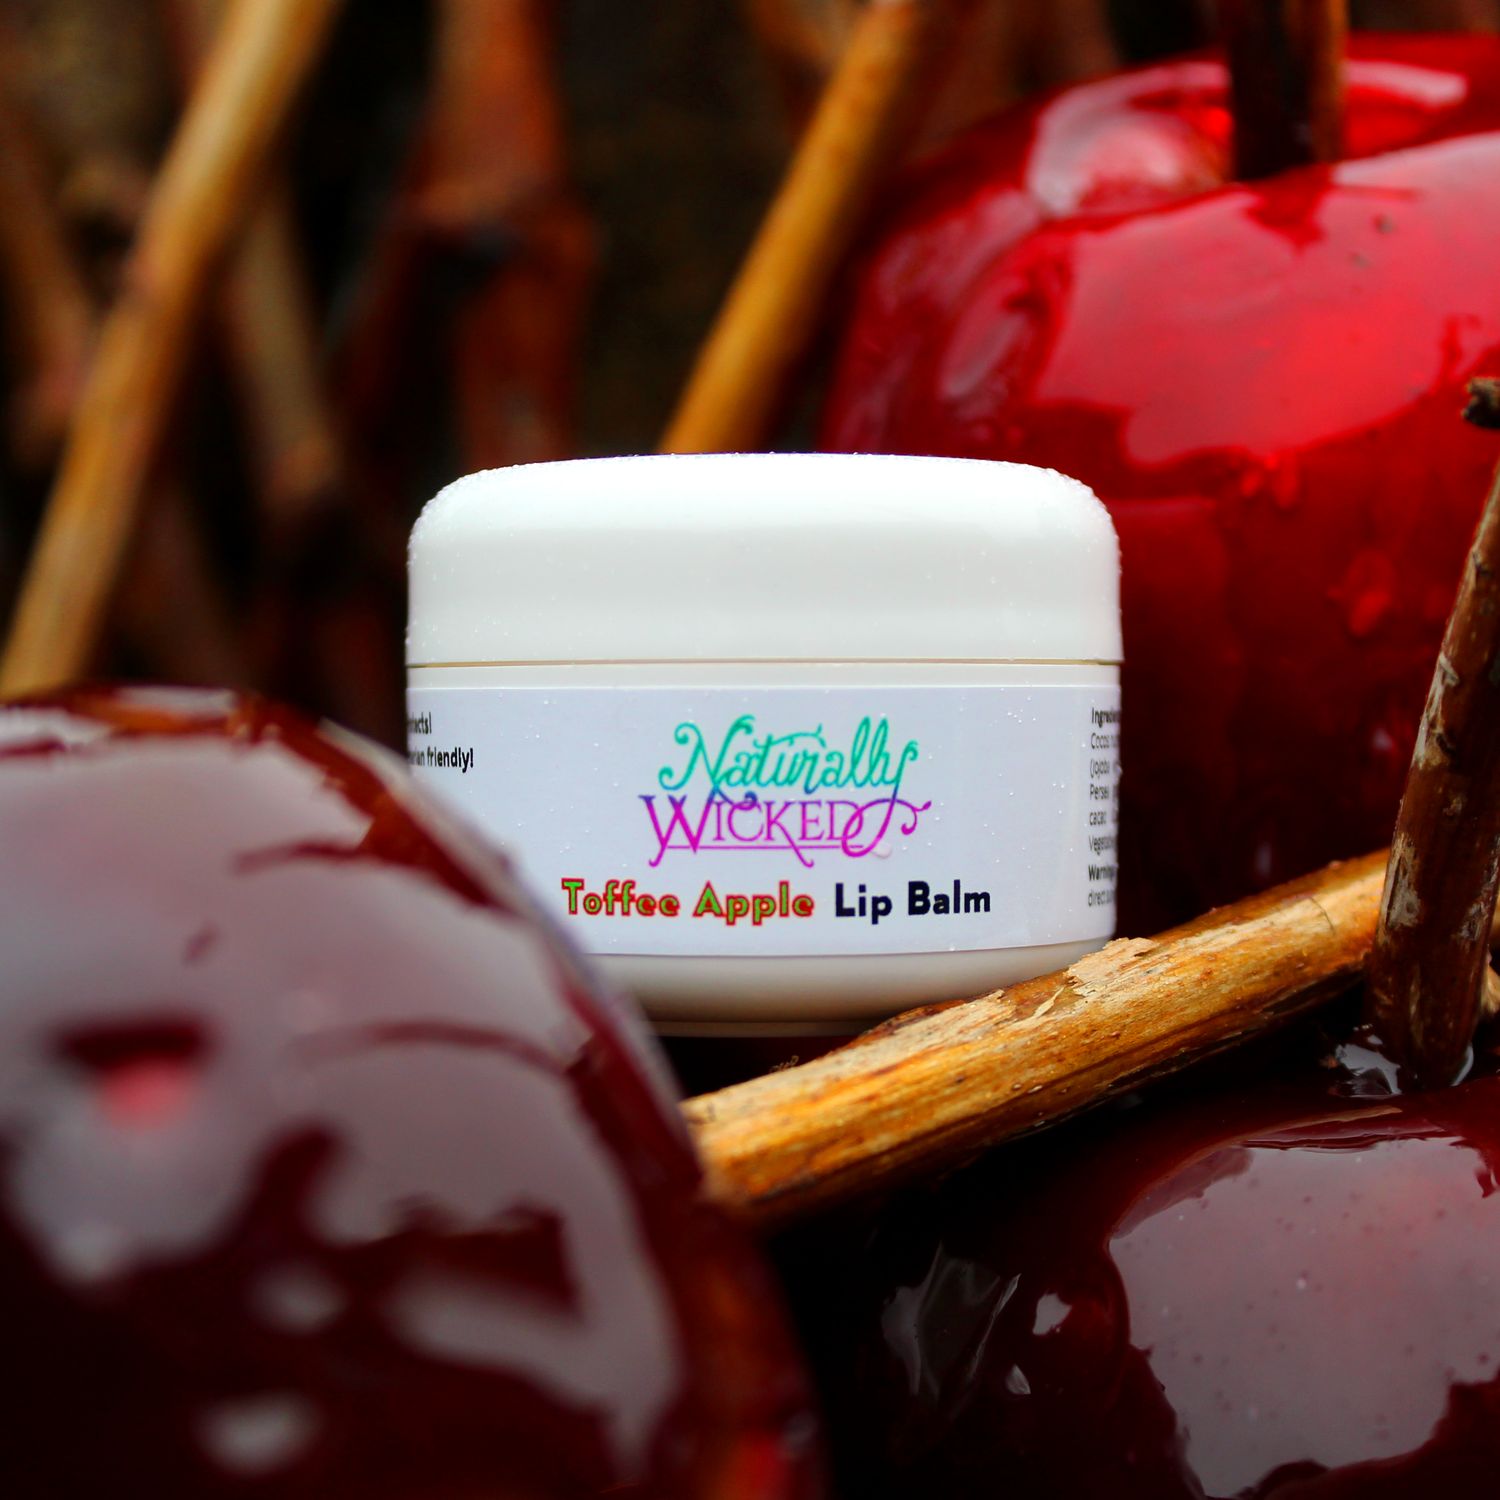 Naturally Wicked Toffee Apple Lip Balm Surrounded By Bright Red & Purple Glossy Toffee Apples & Brown Sticks